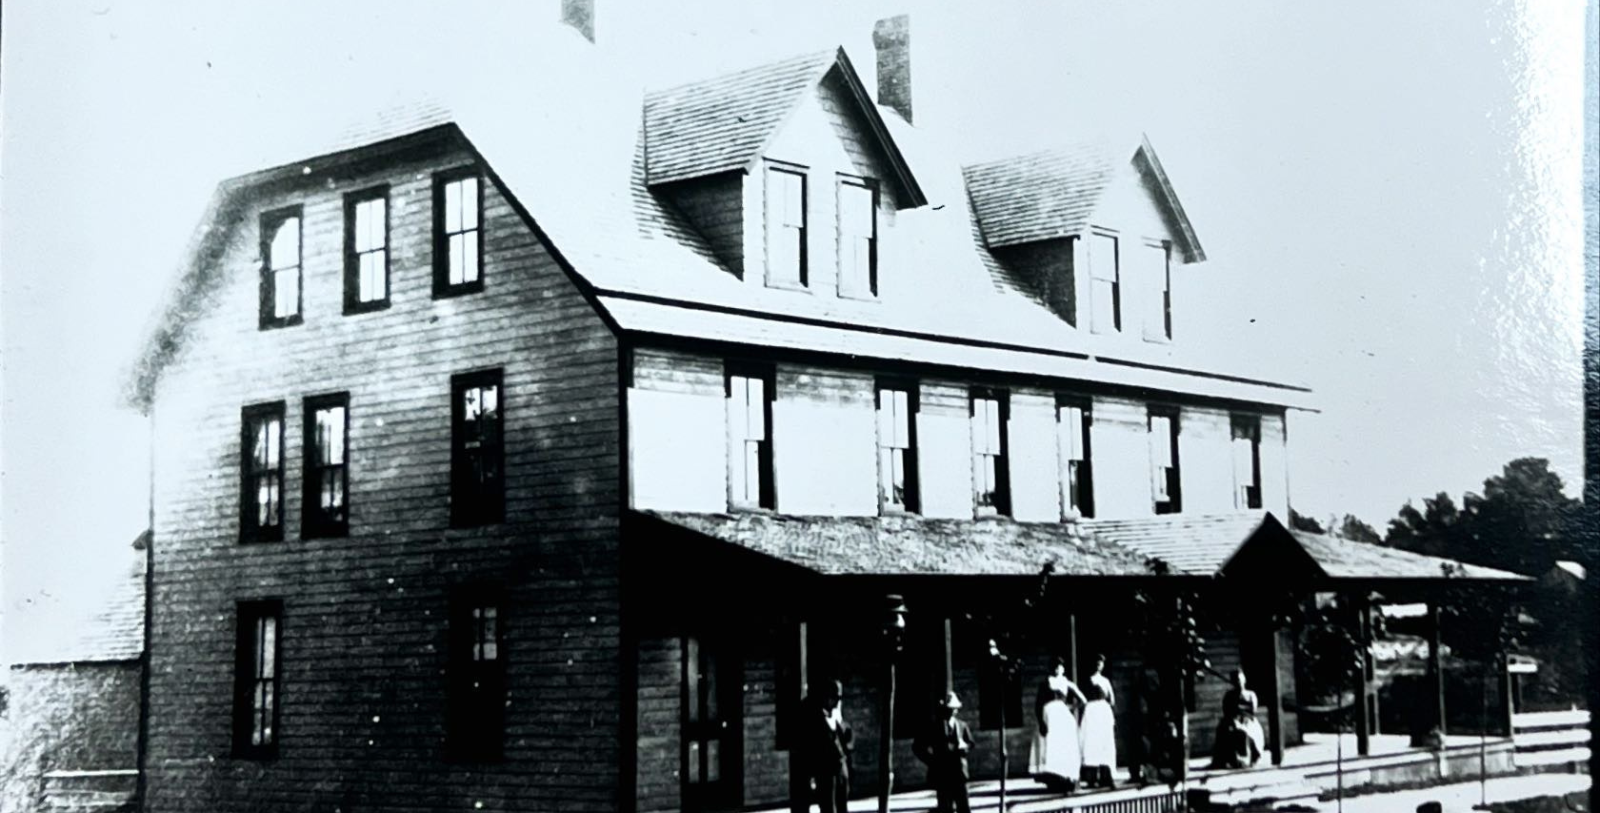 Historical Image of Exterior, Eagle Mere Inn, 1887, Member of Historic Hotels of America, in Eagles Mere, Pennsylvania